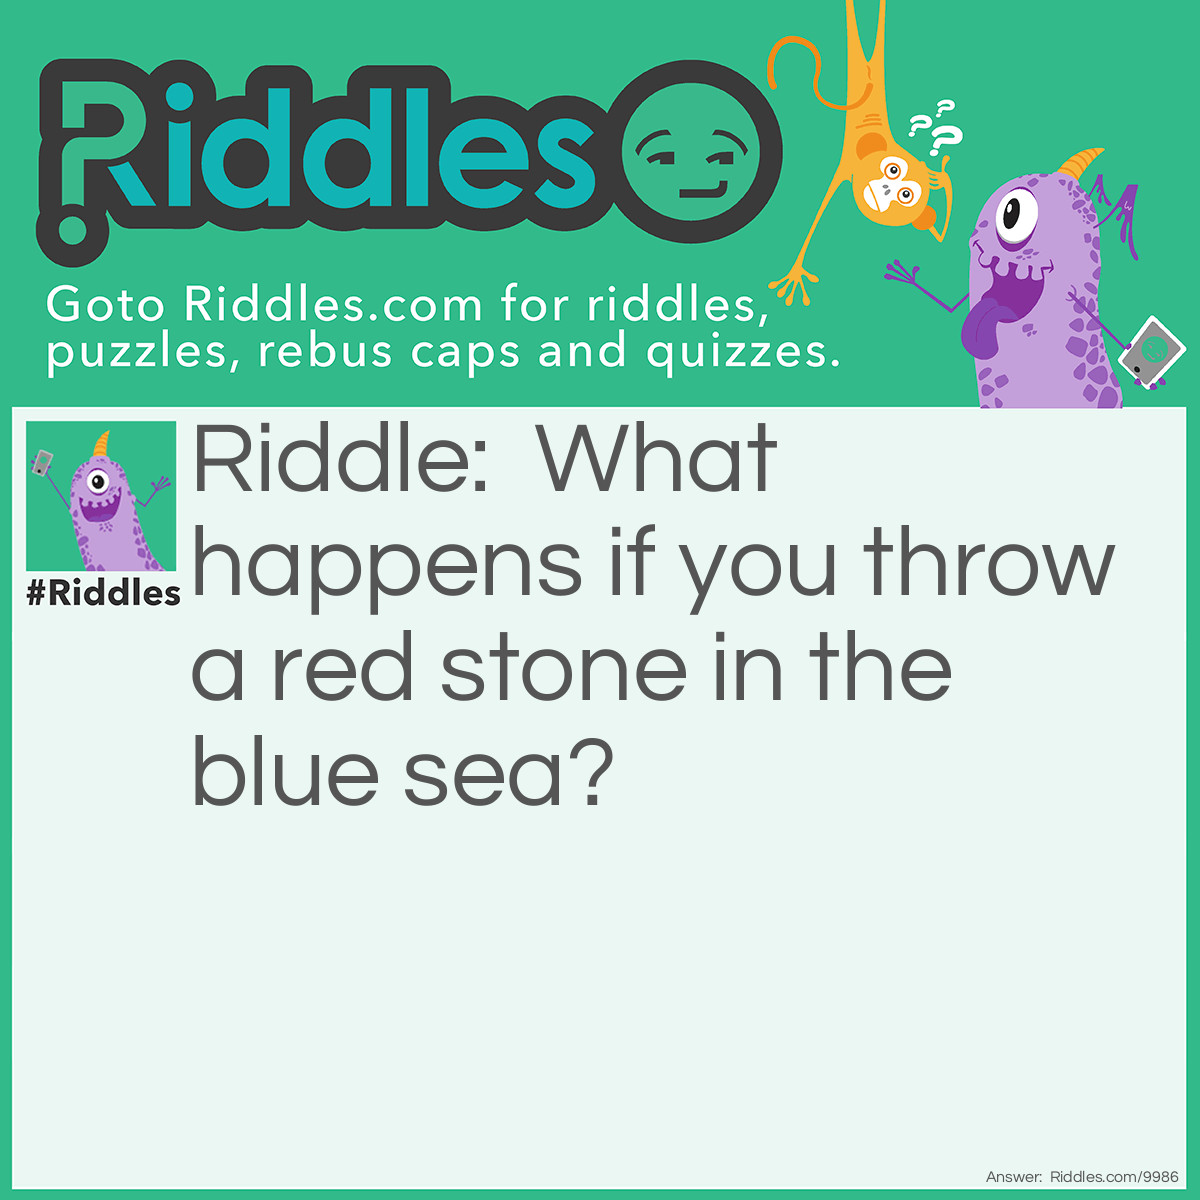 Riddle: What happens if you throw a red stone in the blue sea? Answer: The stone gets wet.